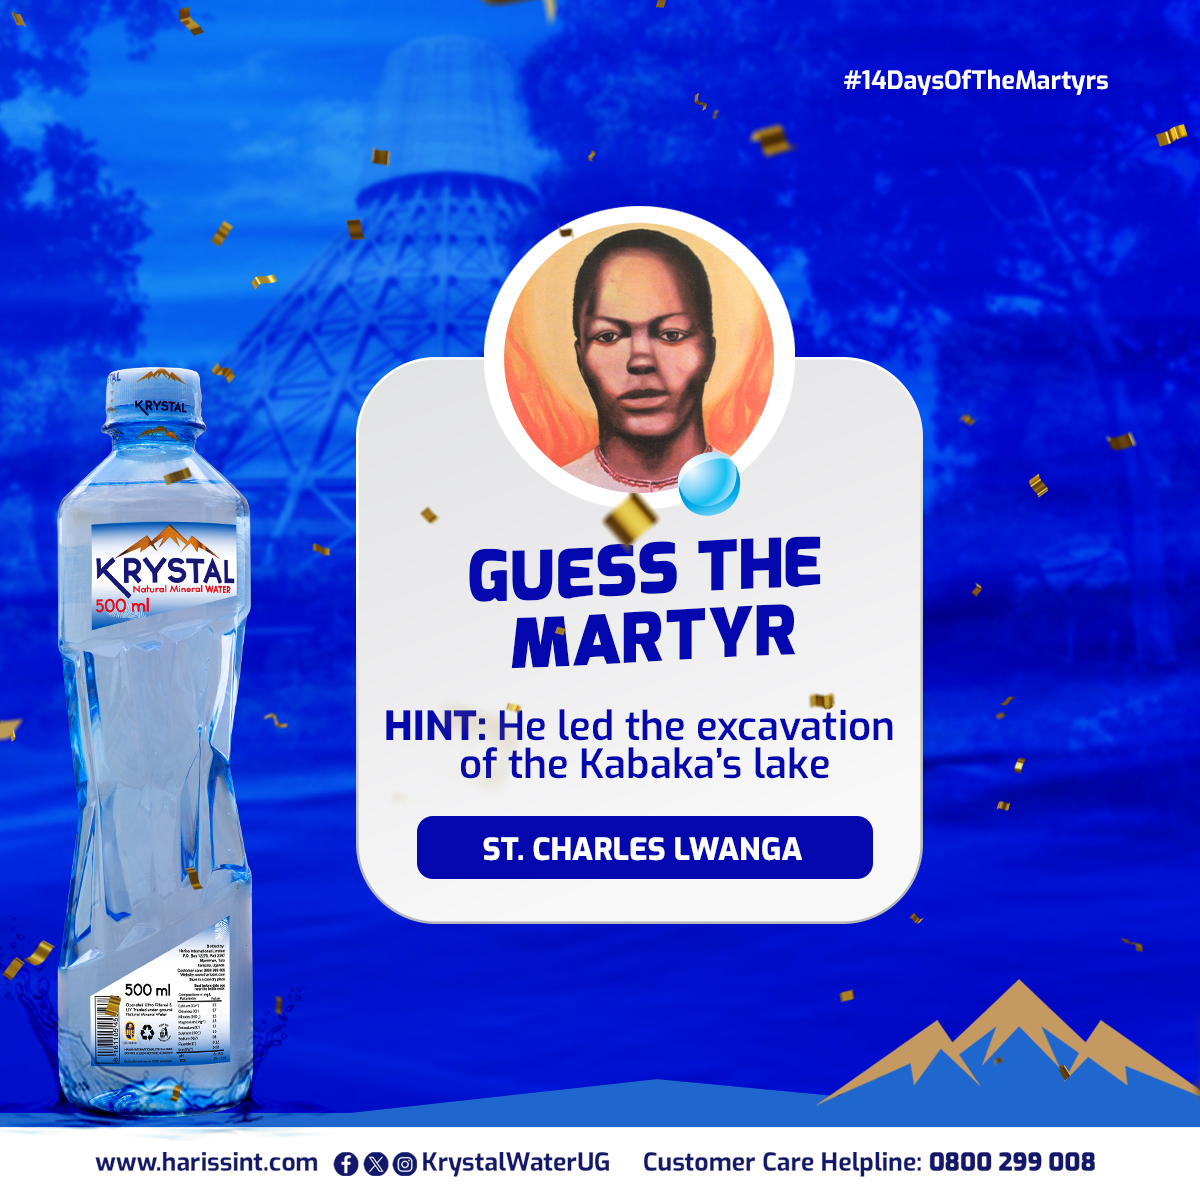 Congratulations, @kamaroma22🎉🎊 You are today's winner of the martyrs' trivia. Don't miss our trivia tomorrow for a chance to be the next lucky winner! #14DaysOfTheMartyrs #UgandaMartyrs